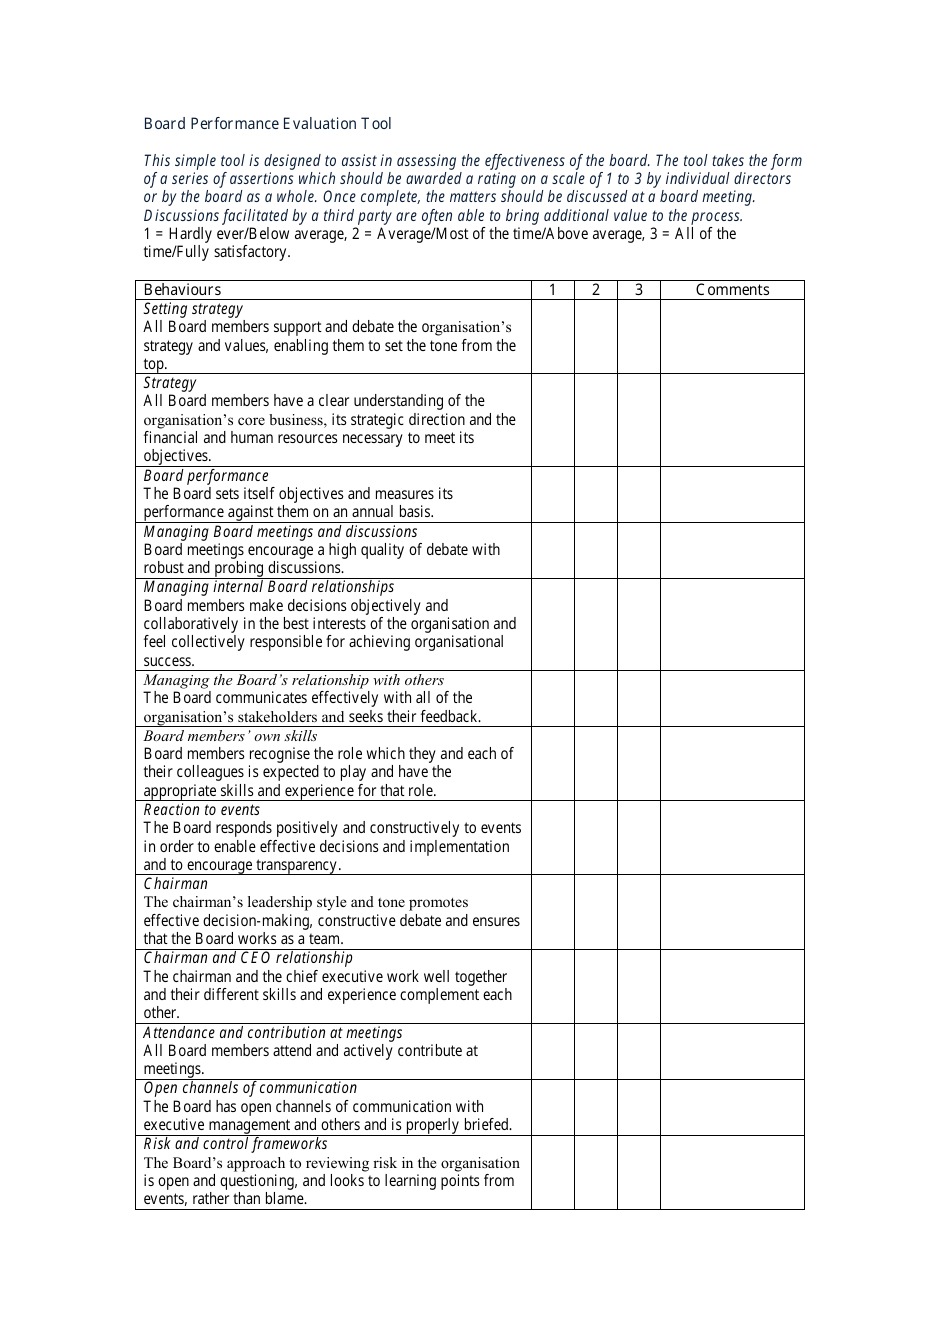 Board Performance Evaluation Form, Page 1